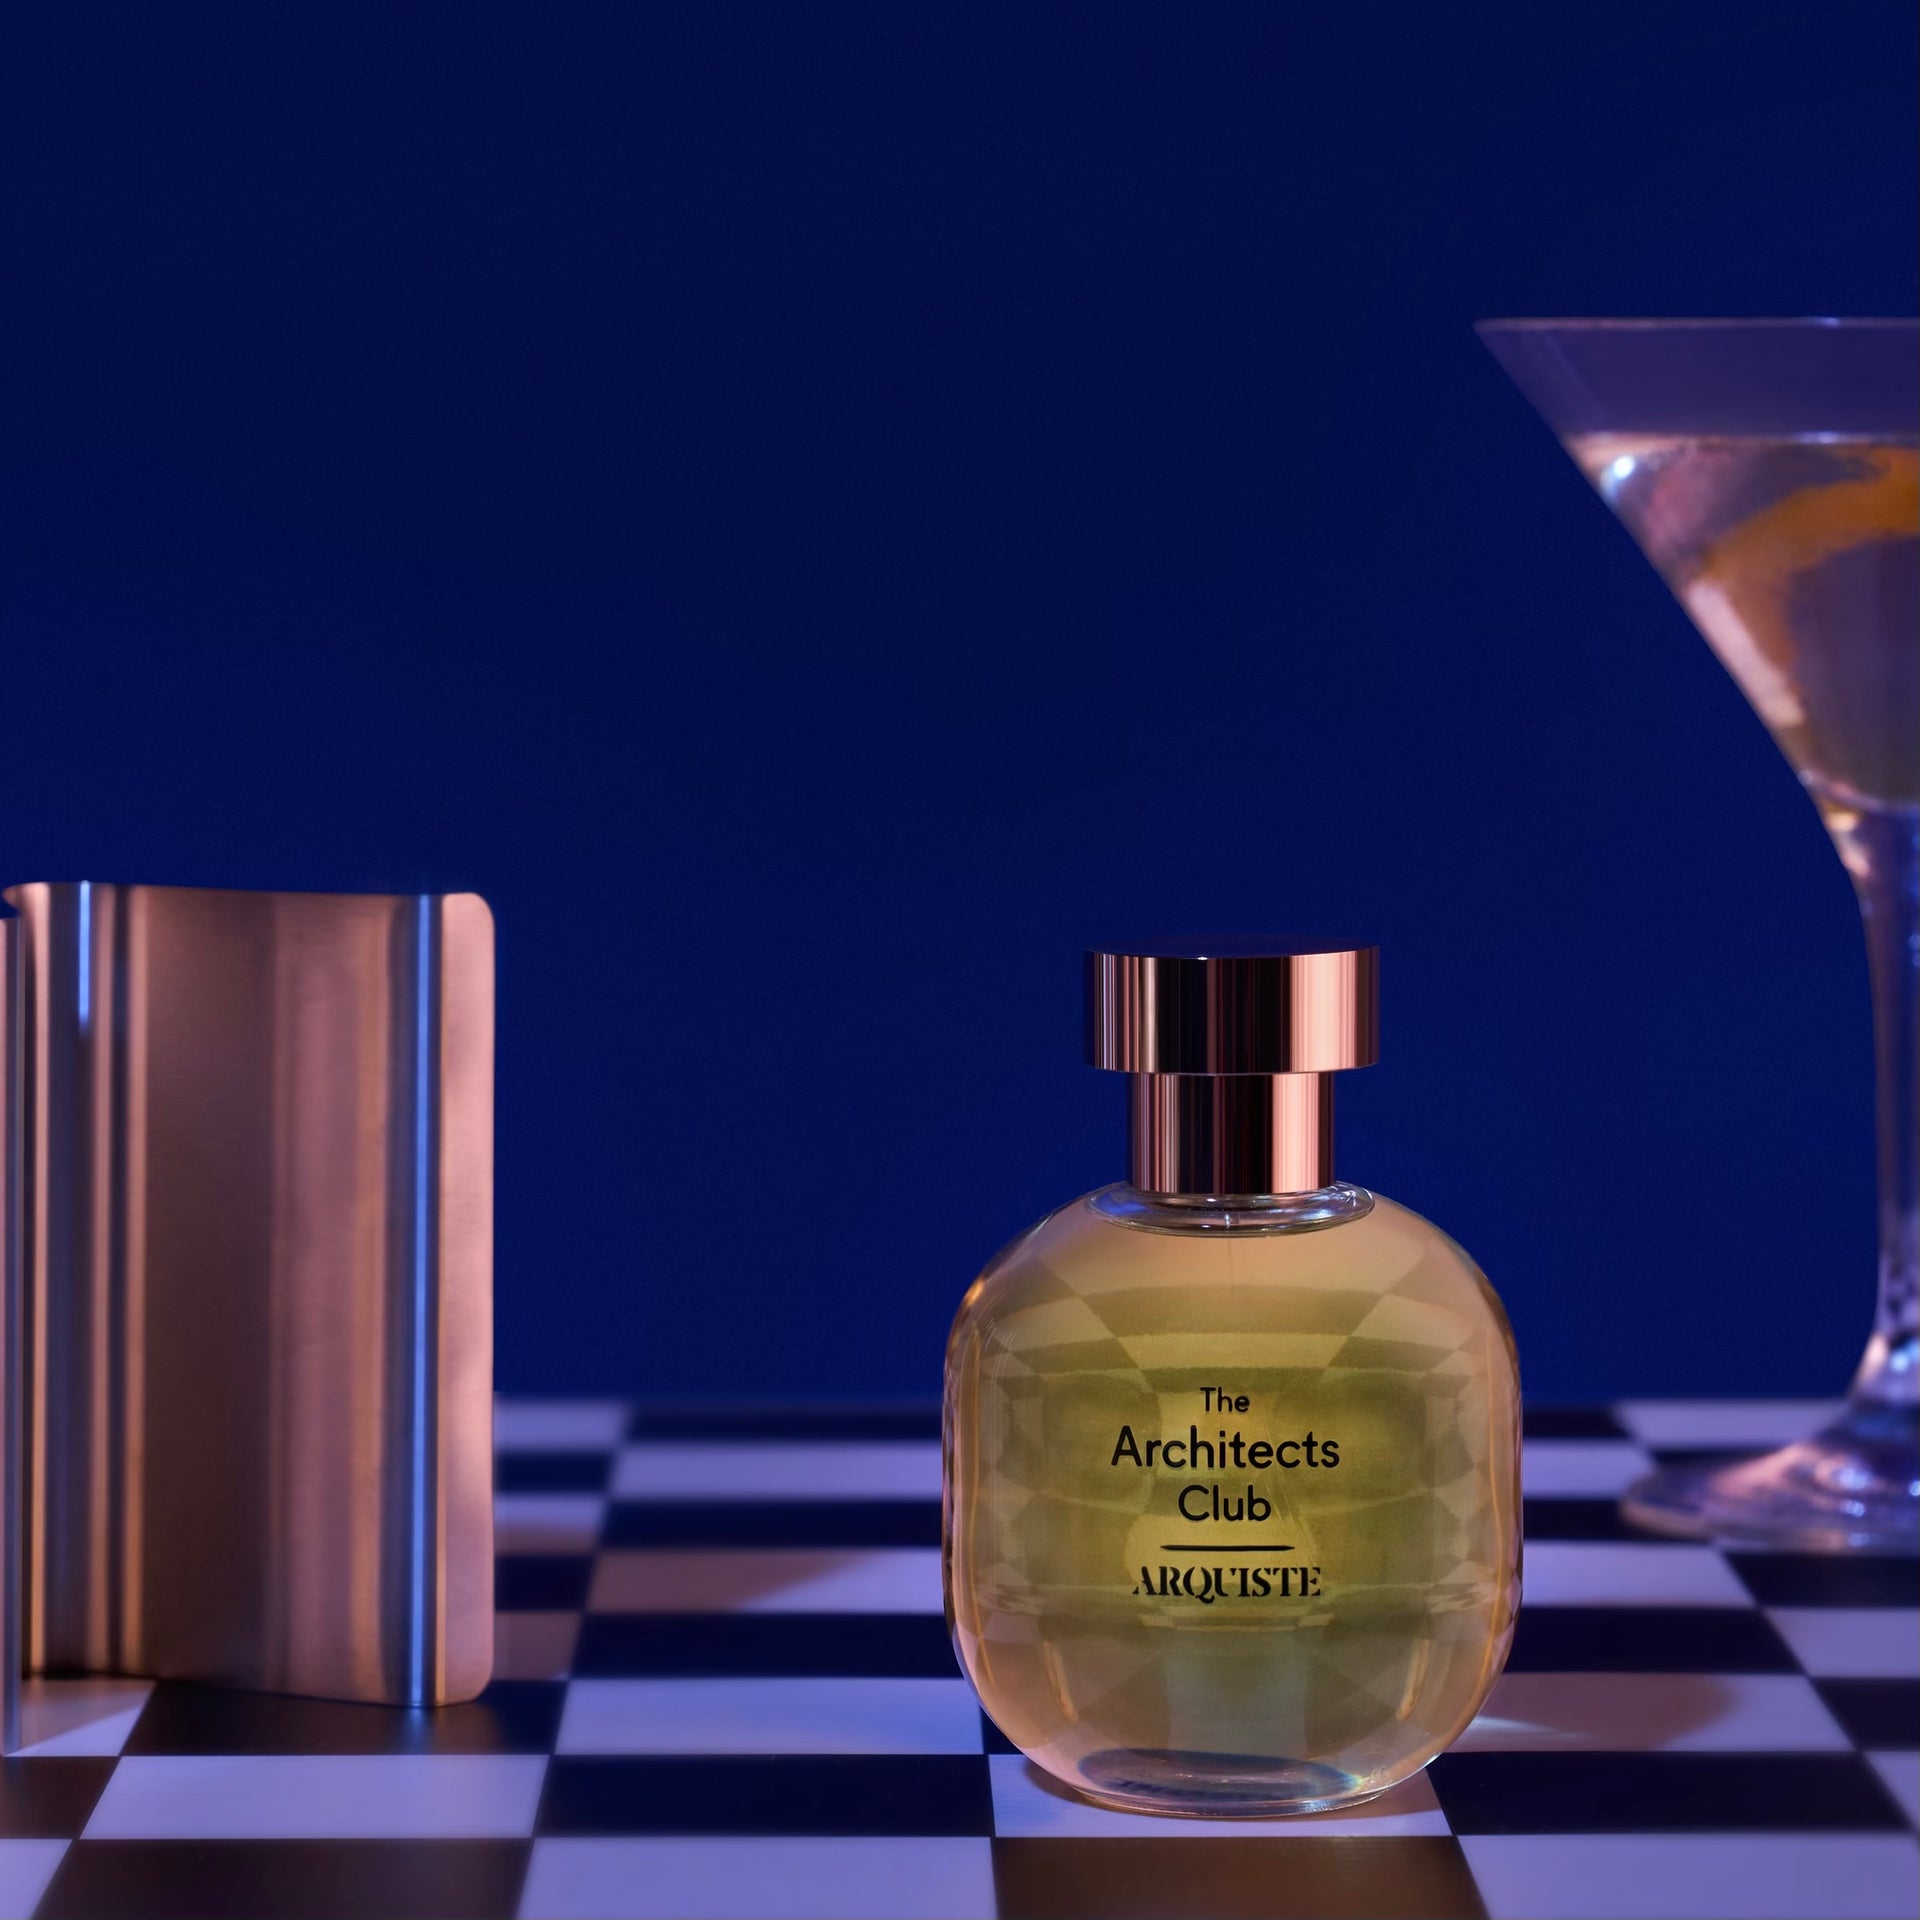 ARQUISTE The Architects Club a gin, tobacco and vanilla fragrance